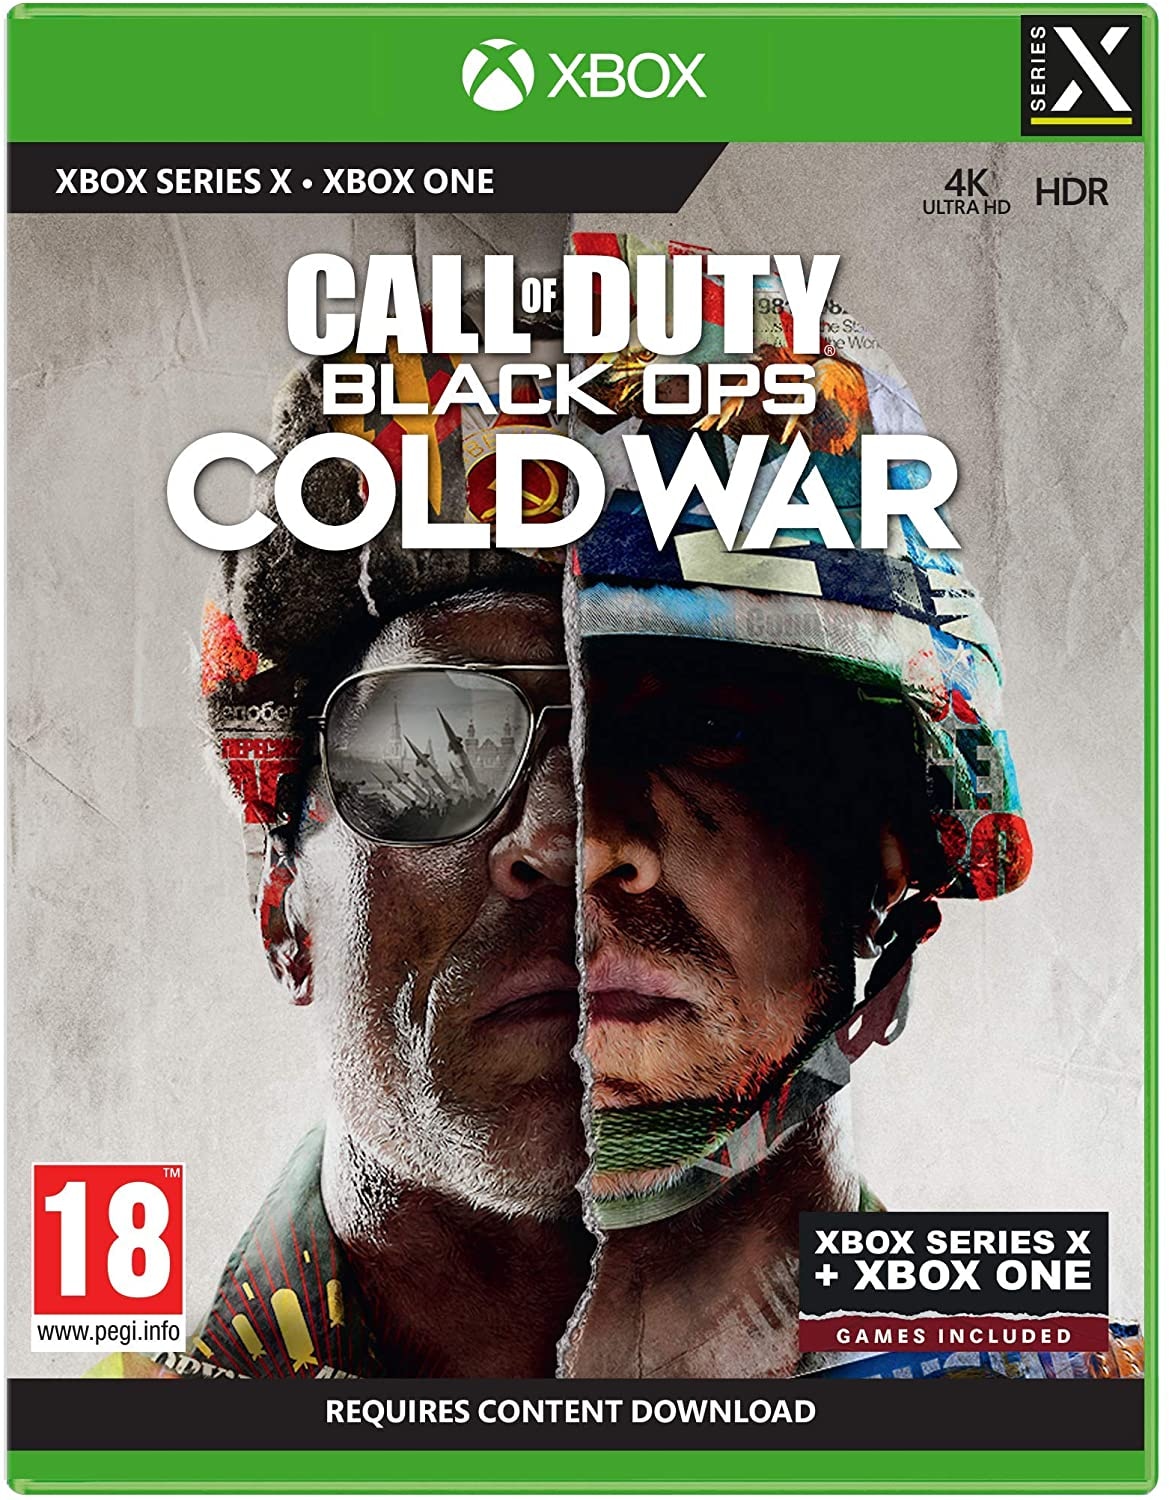 Call of Duty Black Ops: Cold War Xbox Series X Hardcopy (Xbox Series X) Gaming - 1